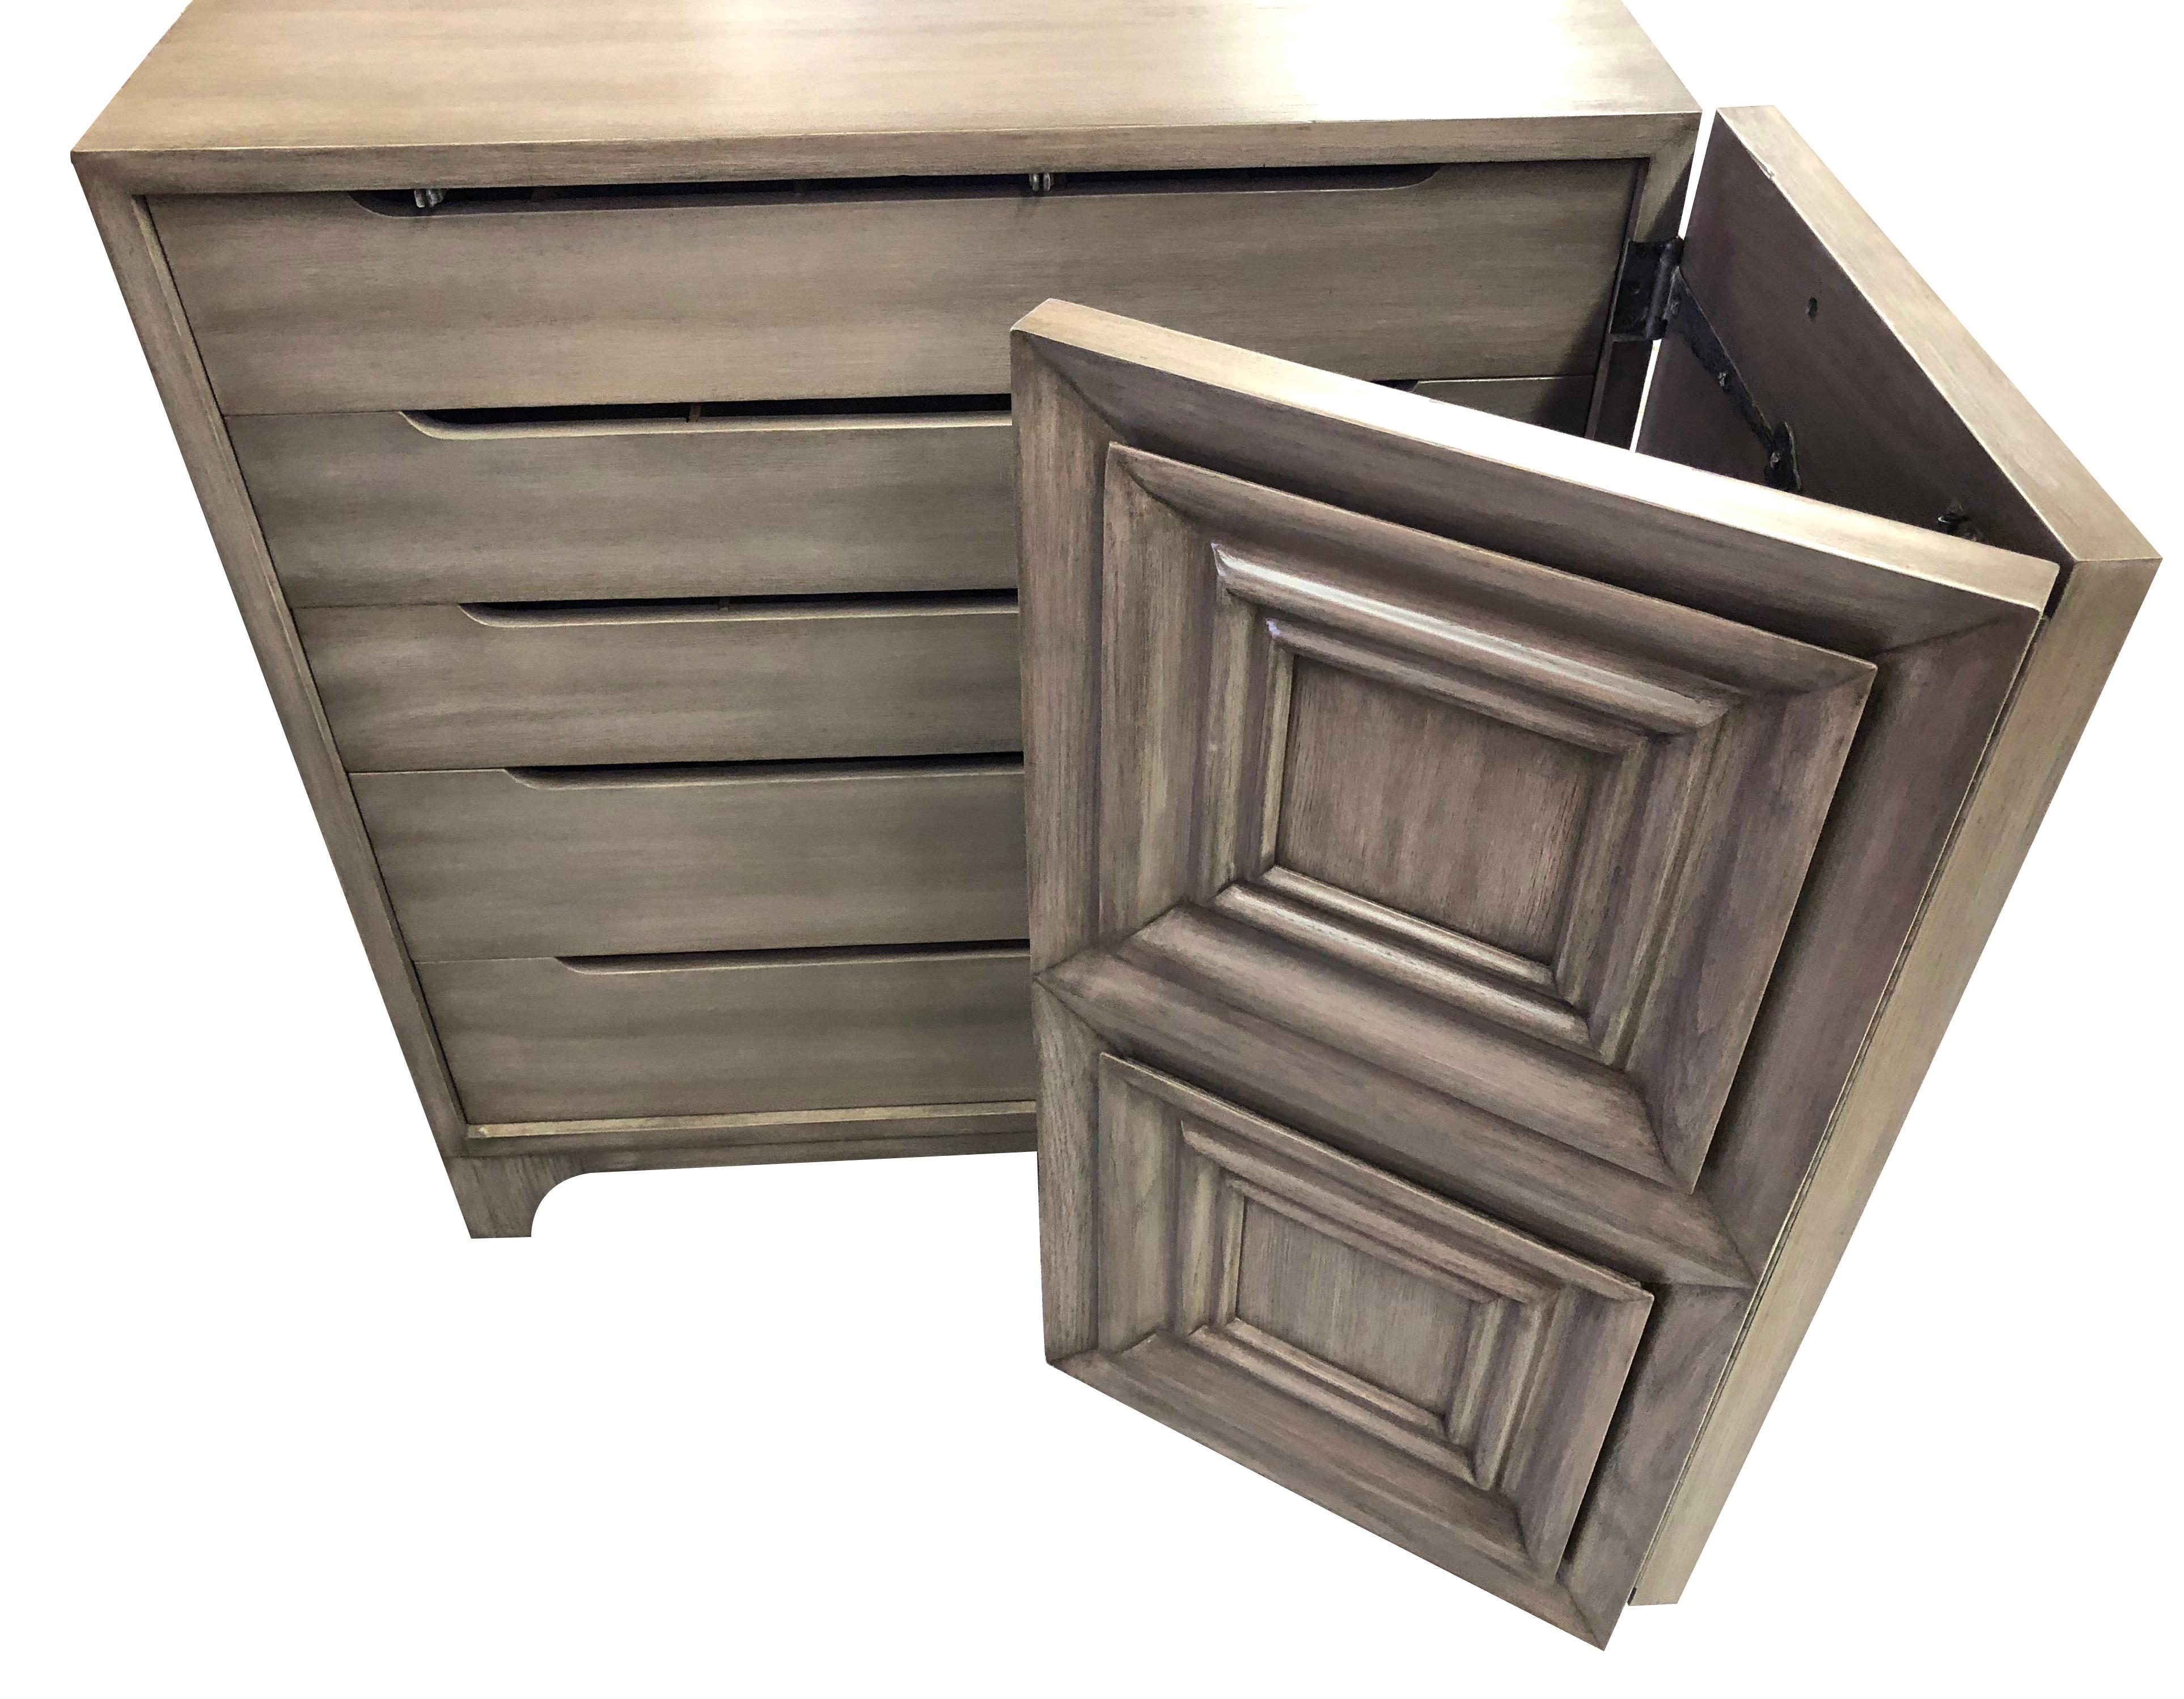 A handsome pair of American midcentury solid grey-cerused oak dressing cabinets with coffered bi-fold doors; each solid cabinet with bi-fold doors adorned with coffered panels opening to reveal 5 long drawers.